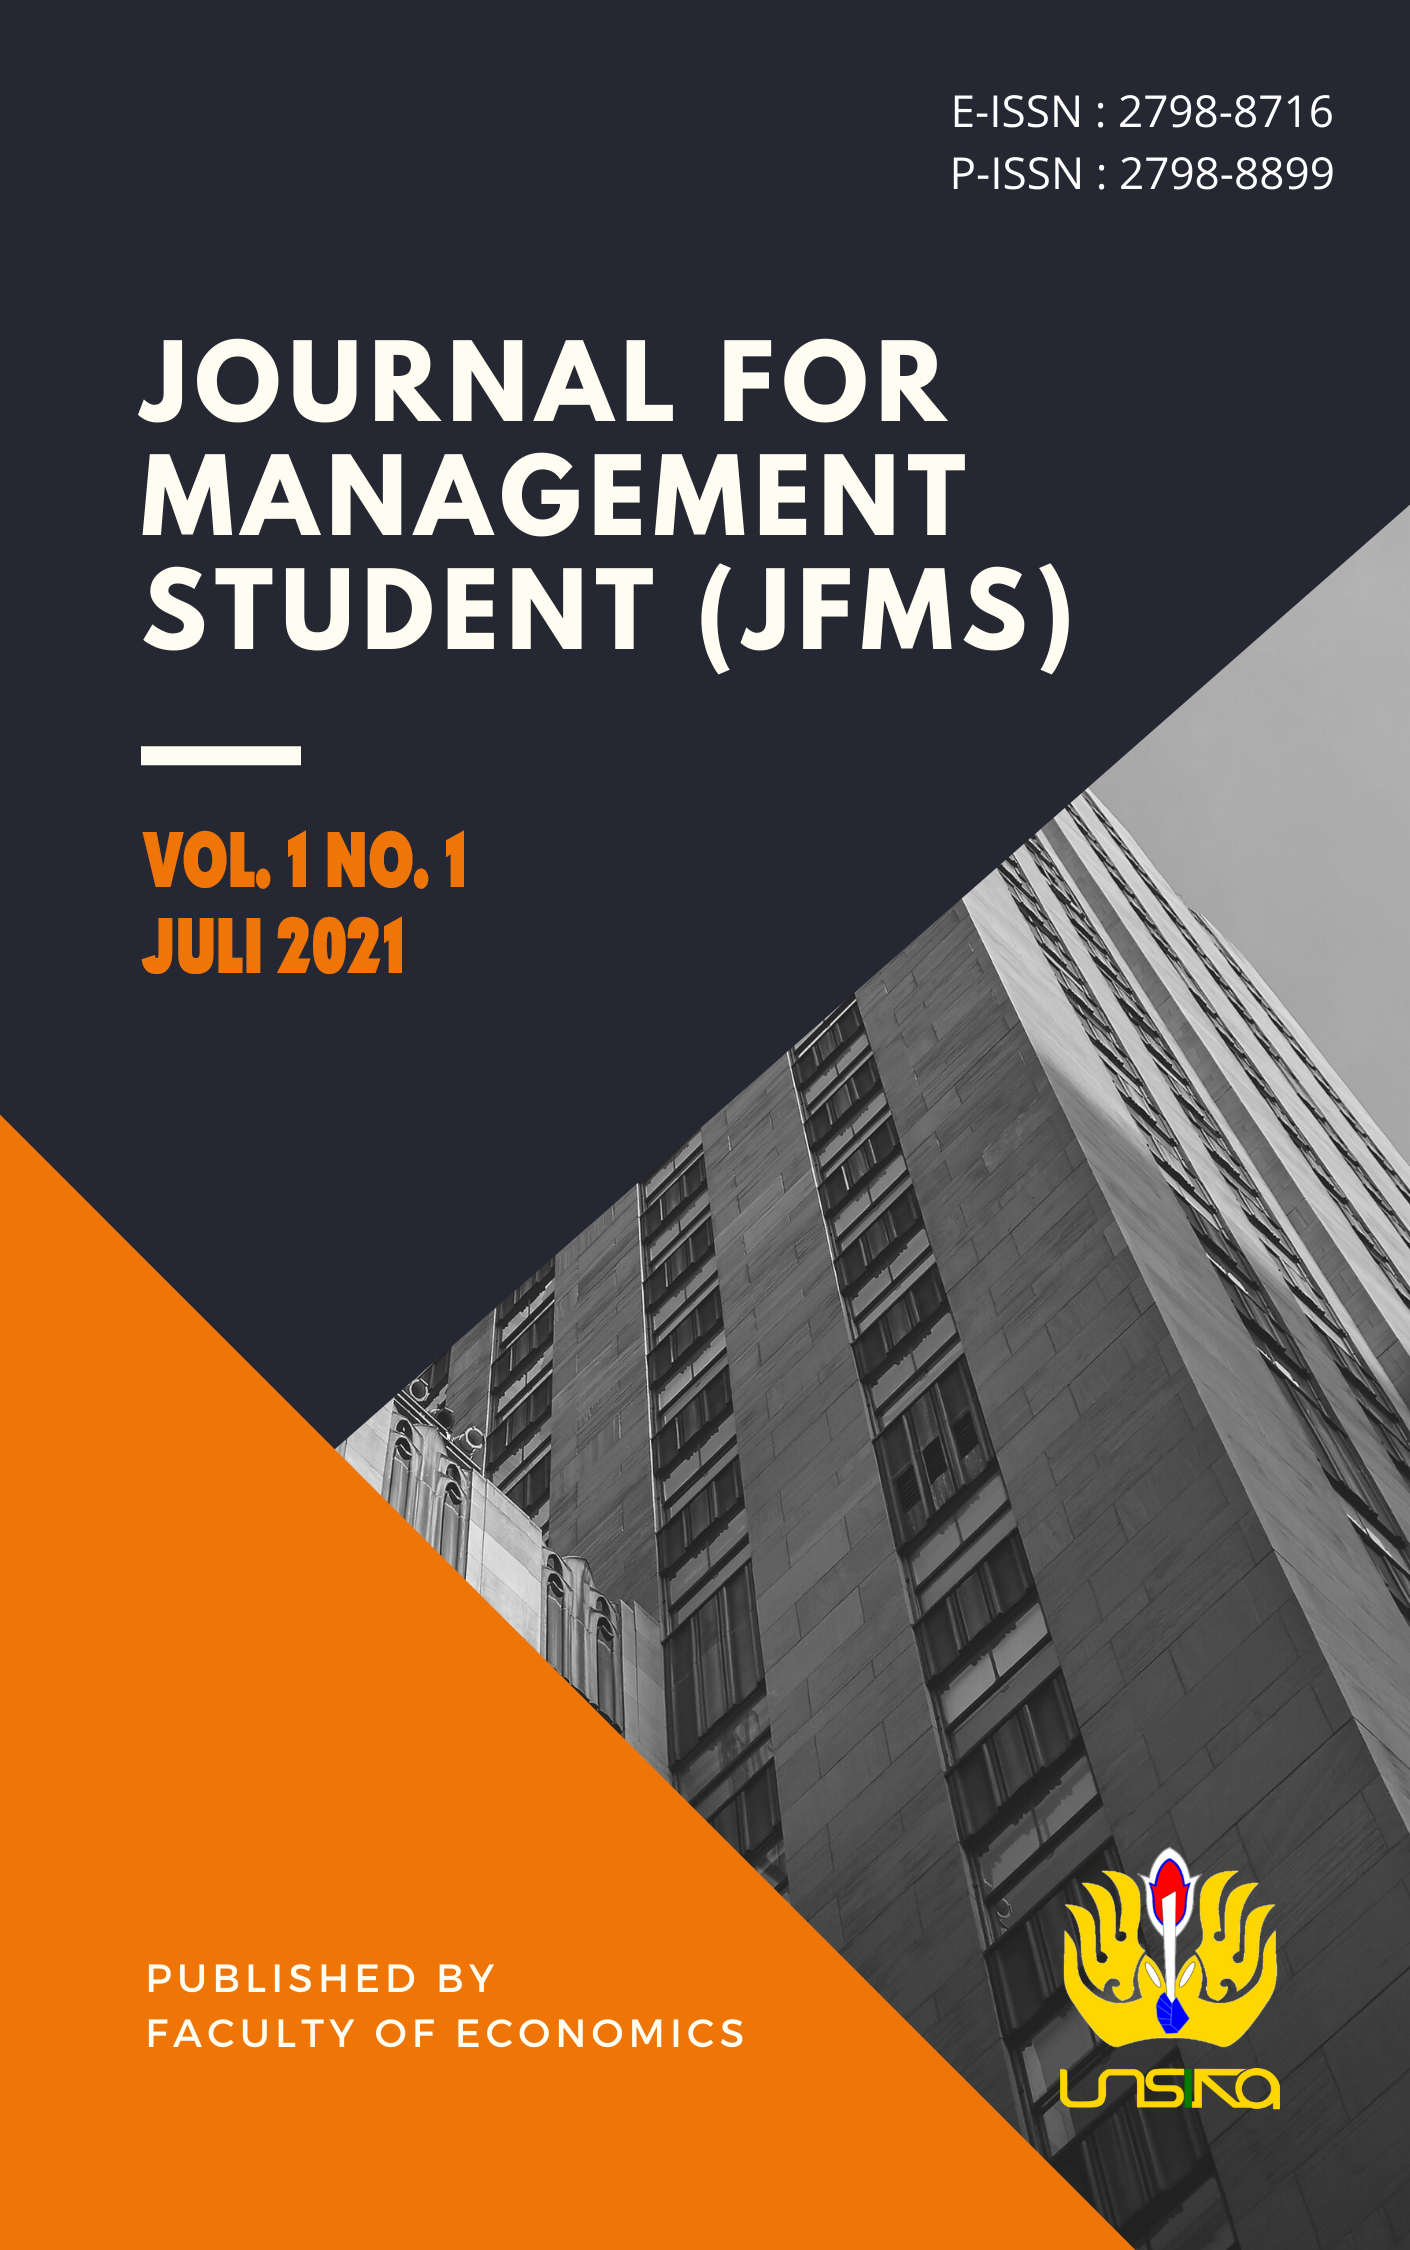 					View Vol. 1 No. 1 (2021): JOURNAL FOR MANAGEMENT STUDENT
				